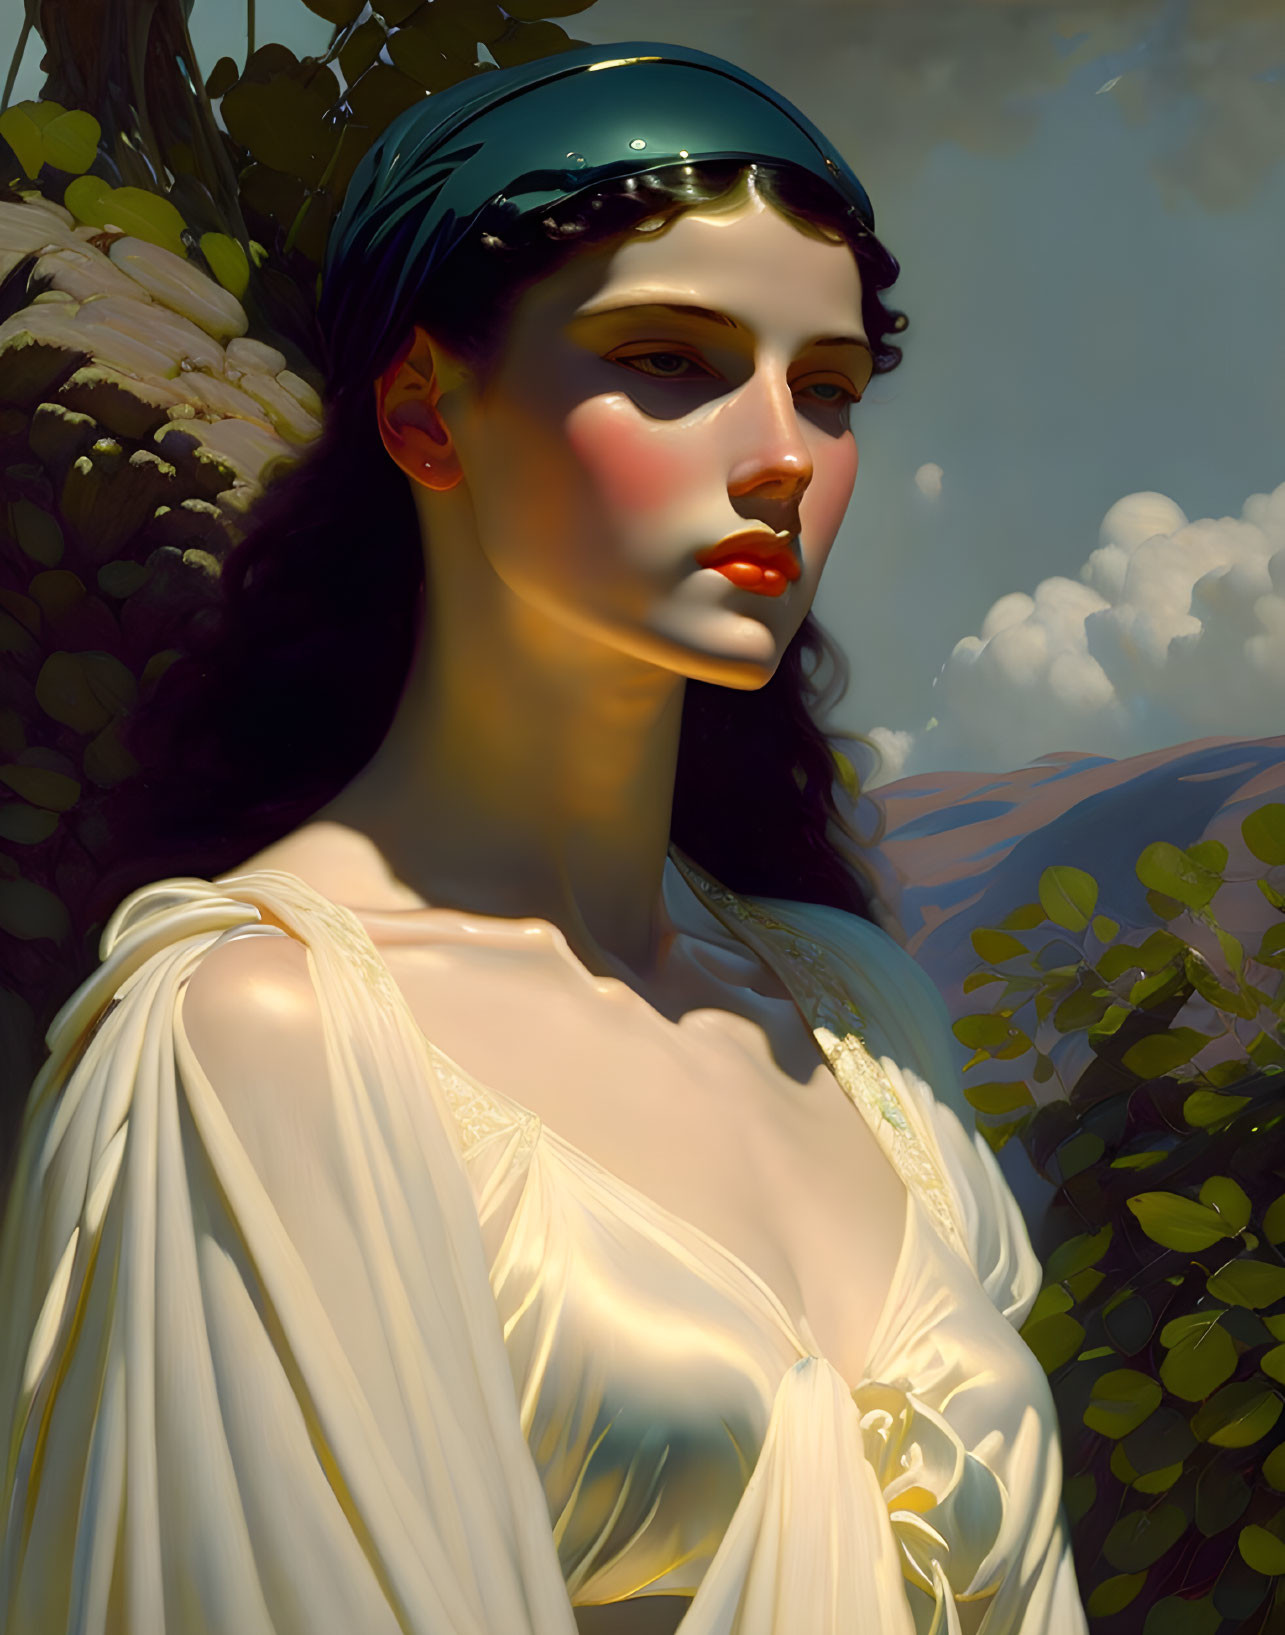 Serene woman in white gown with headband against mountain backdrop